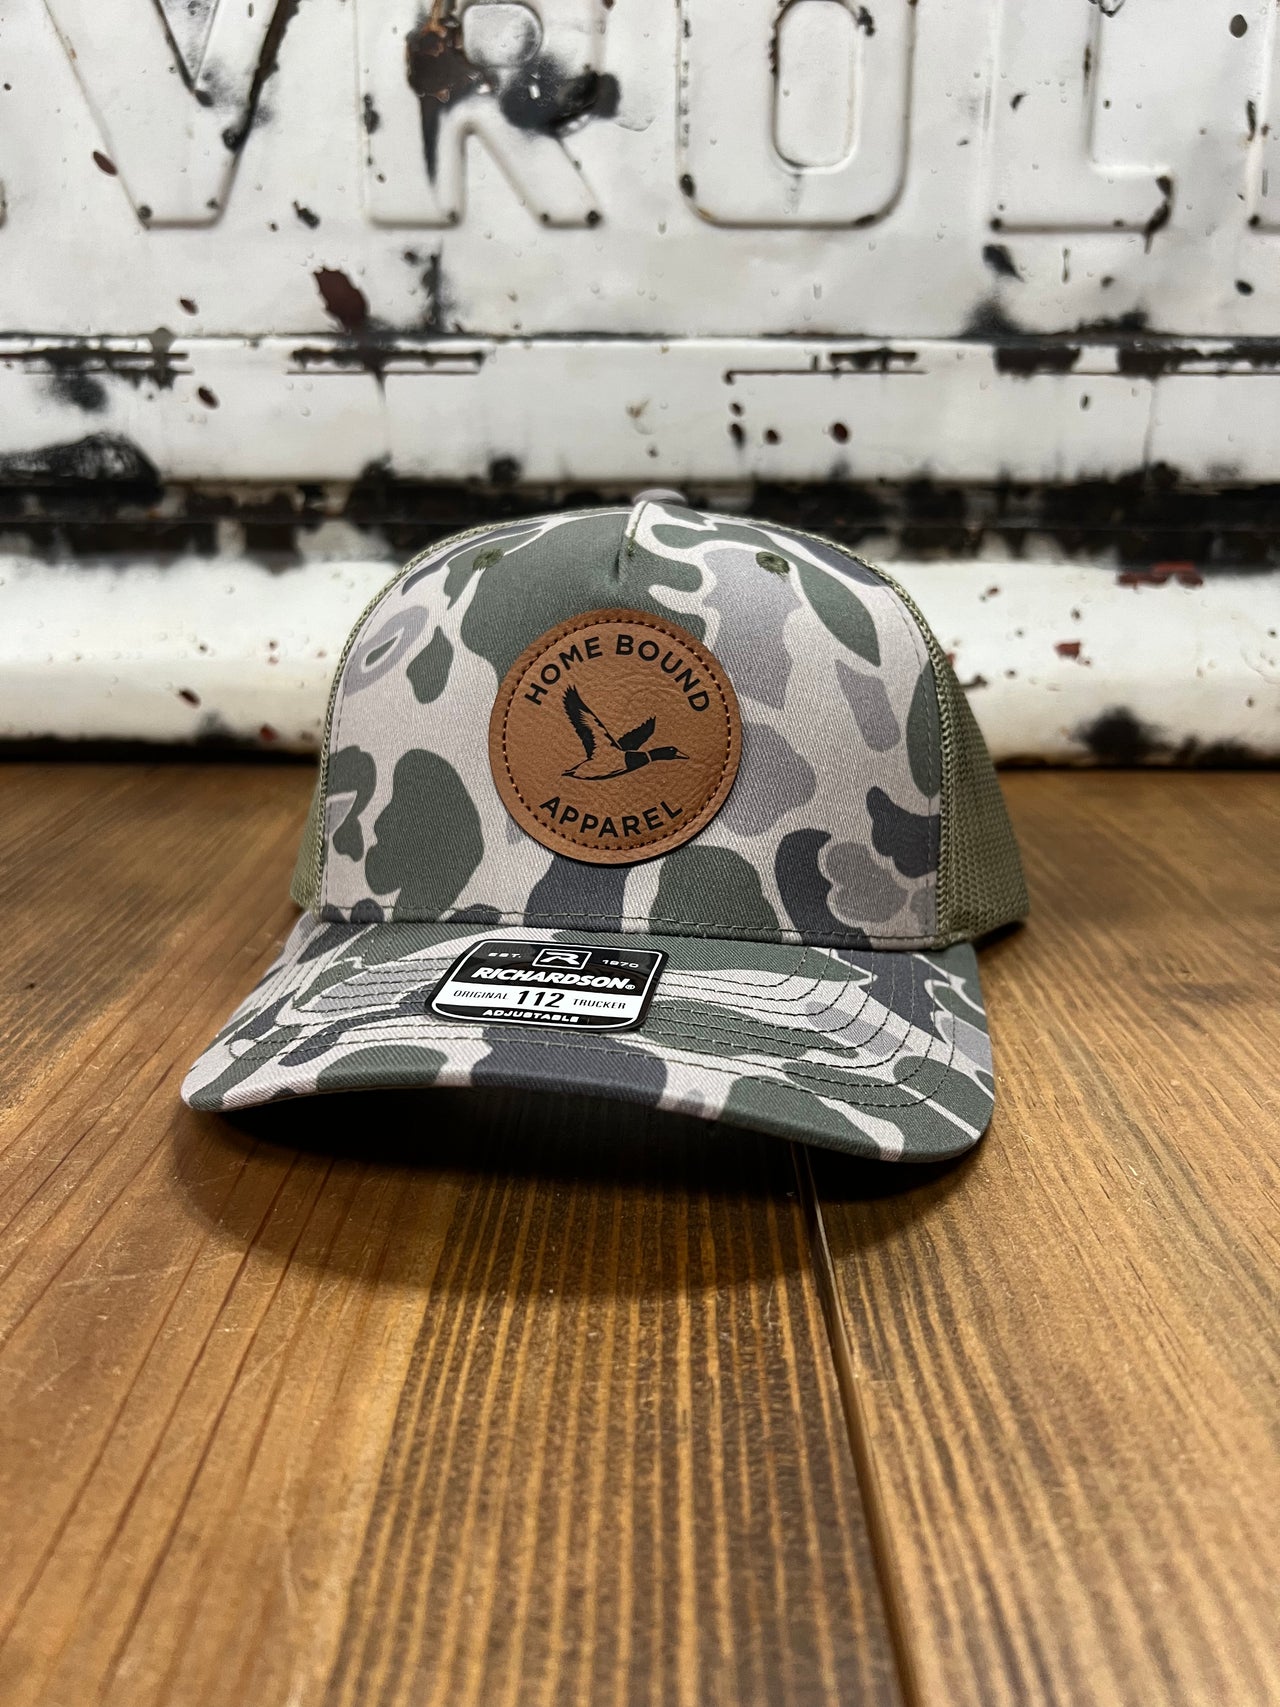 Home Bound Flying Duck Leather Patch Trucker Cap - Marsh Green Duck Camo